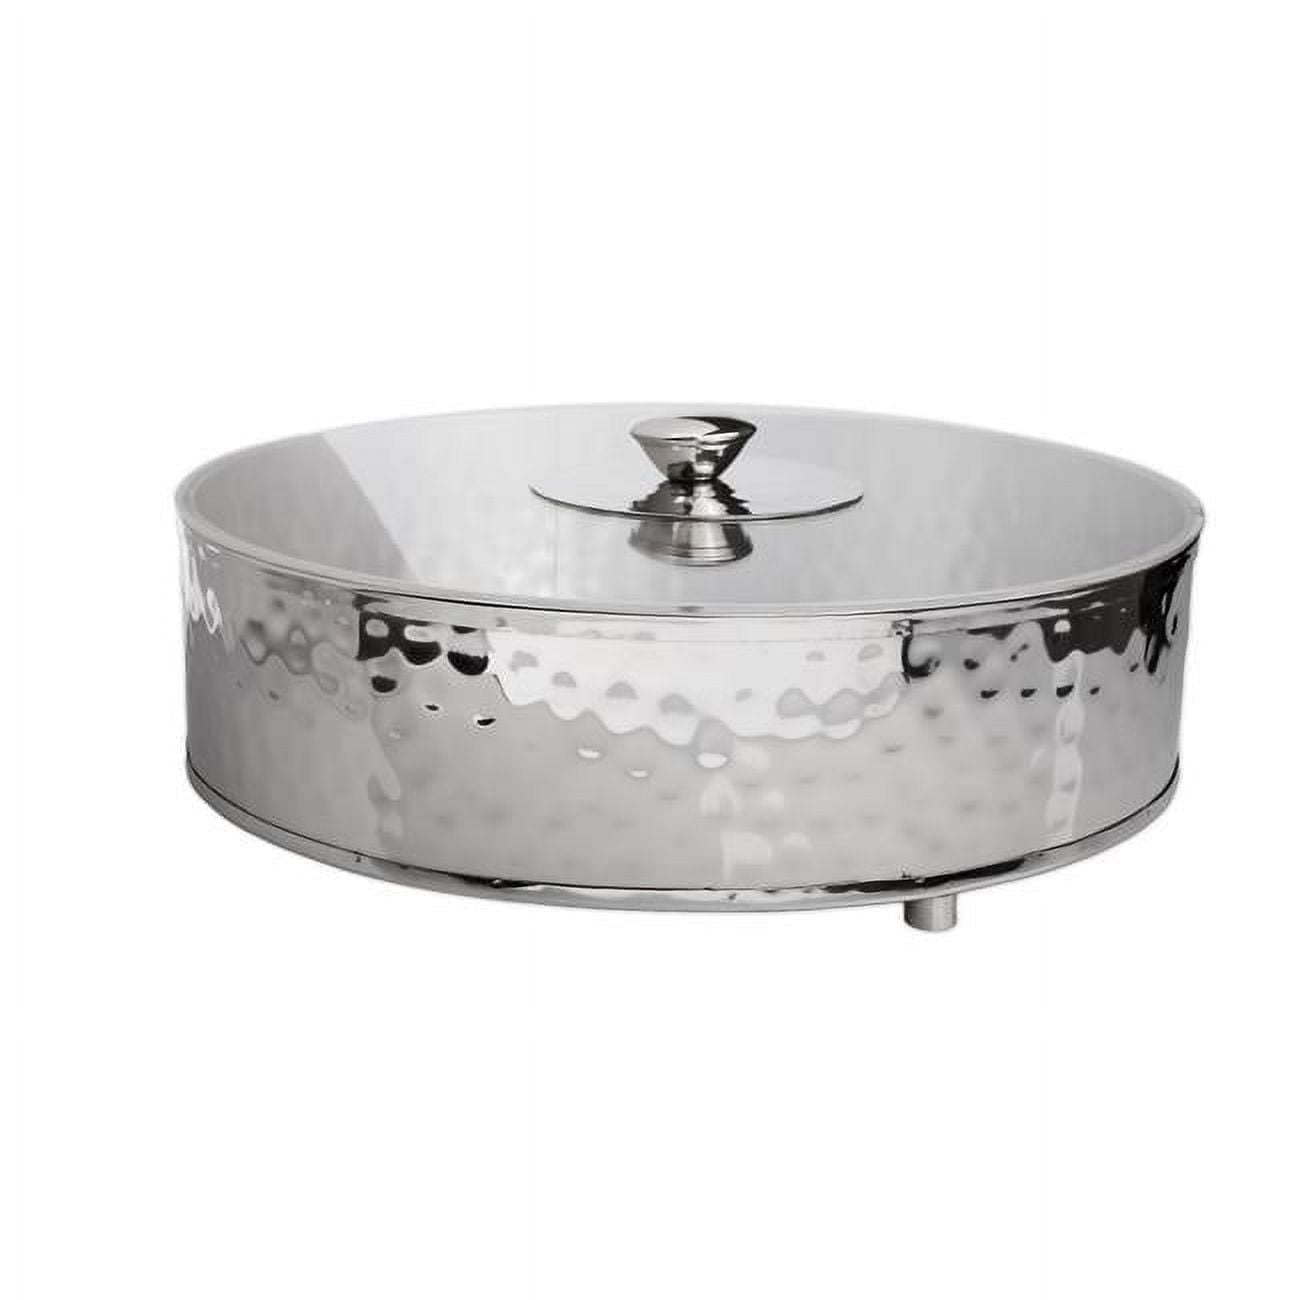 Classic Touch Jmb452 Round Stainless Steel Matzah Tray With Acrylic Cover